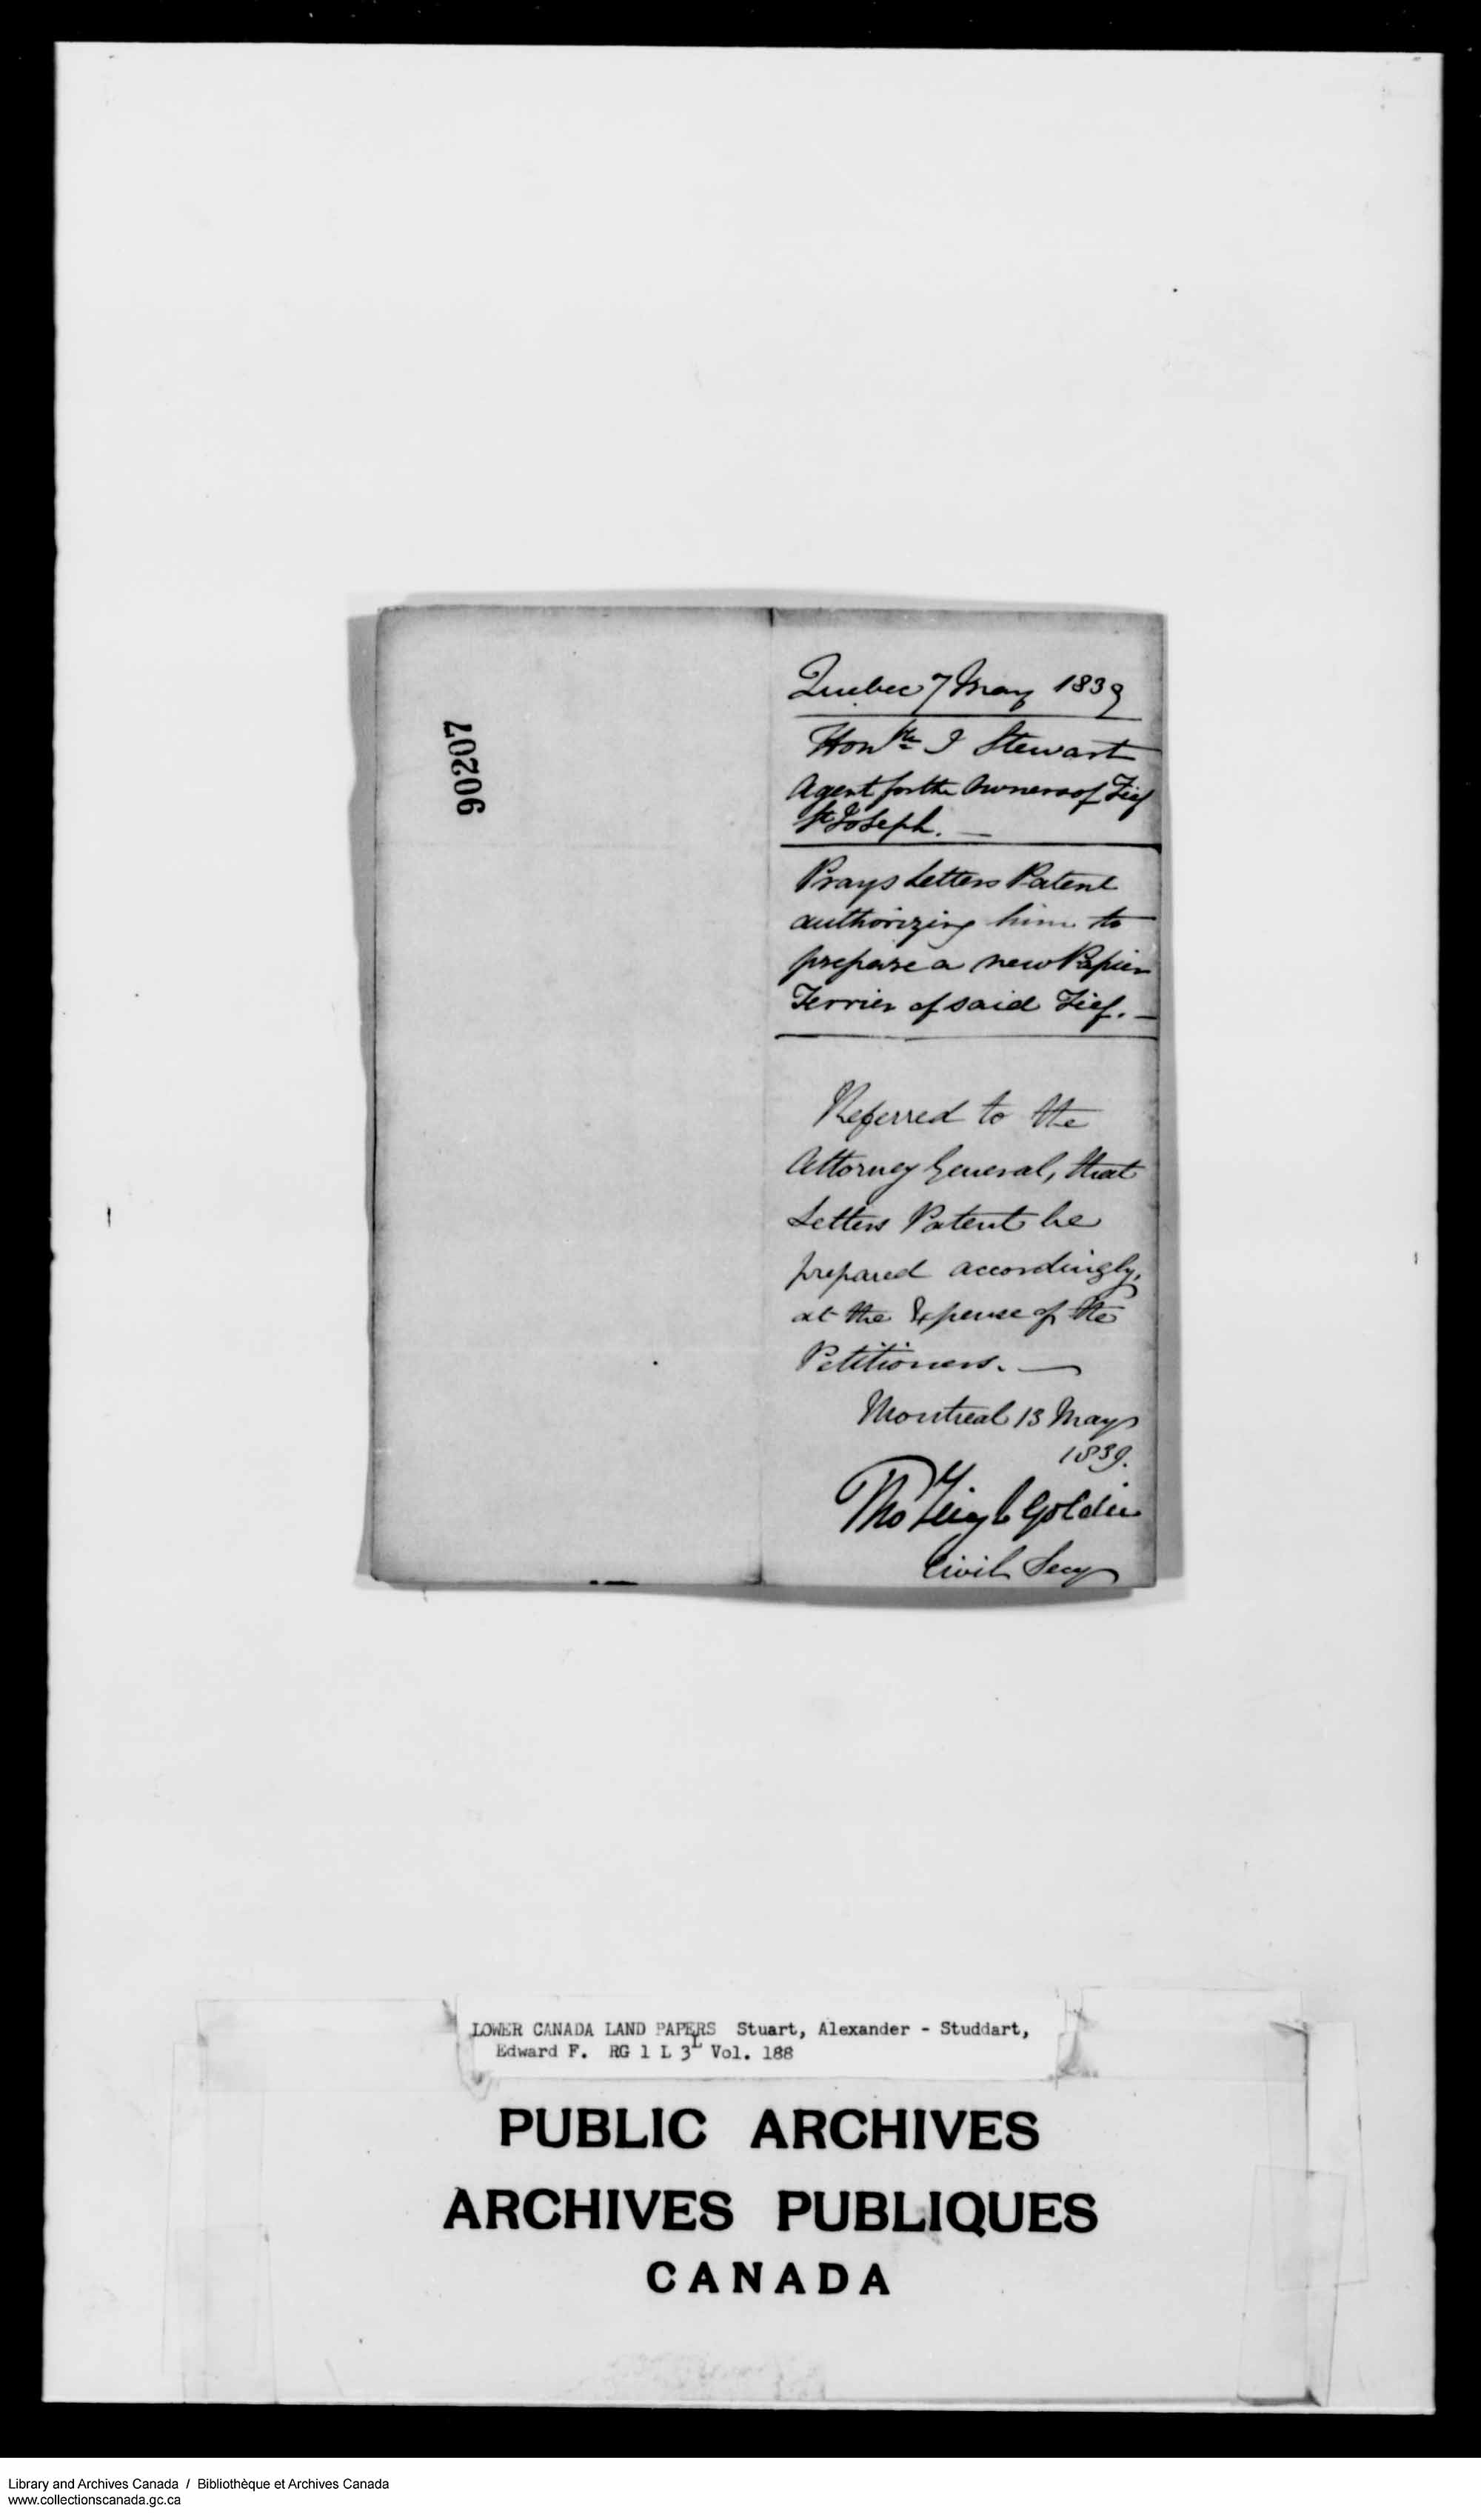 Digitized page of  for Image No.: e008737335